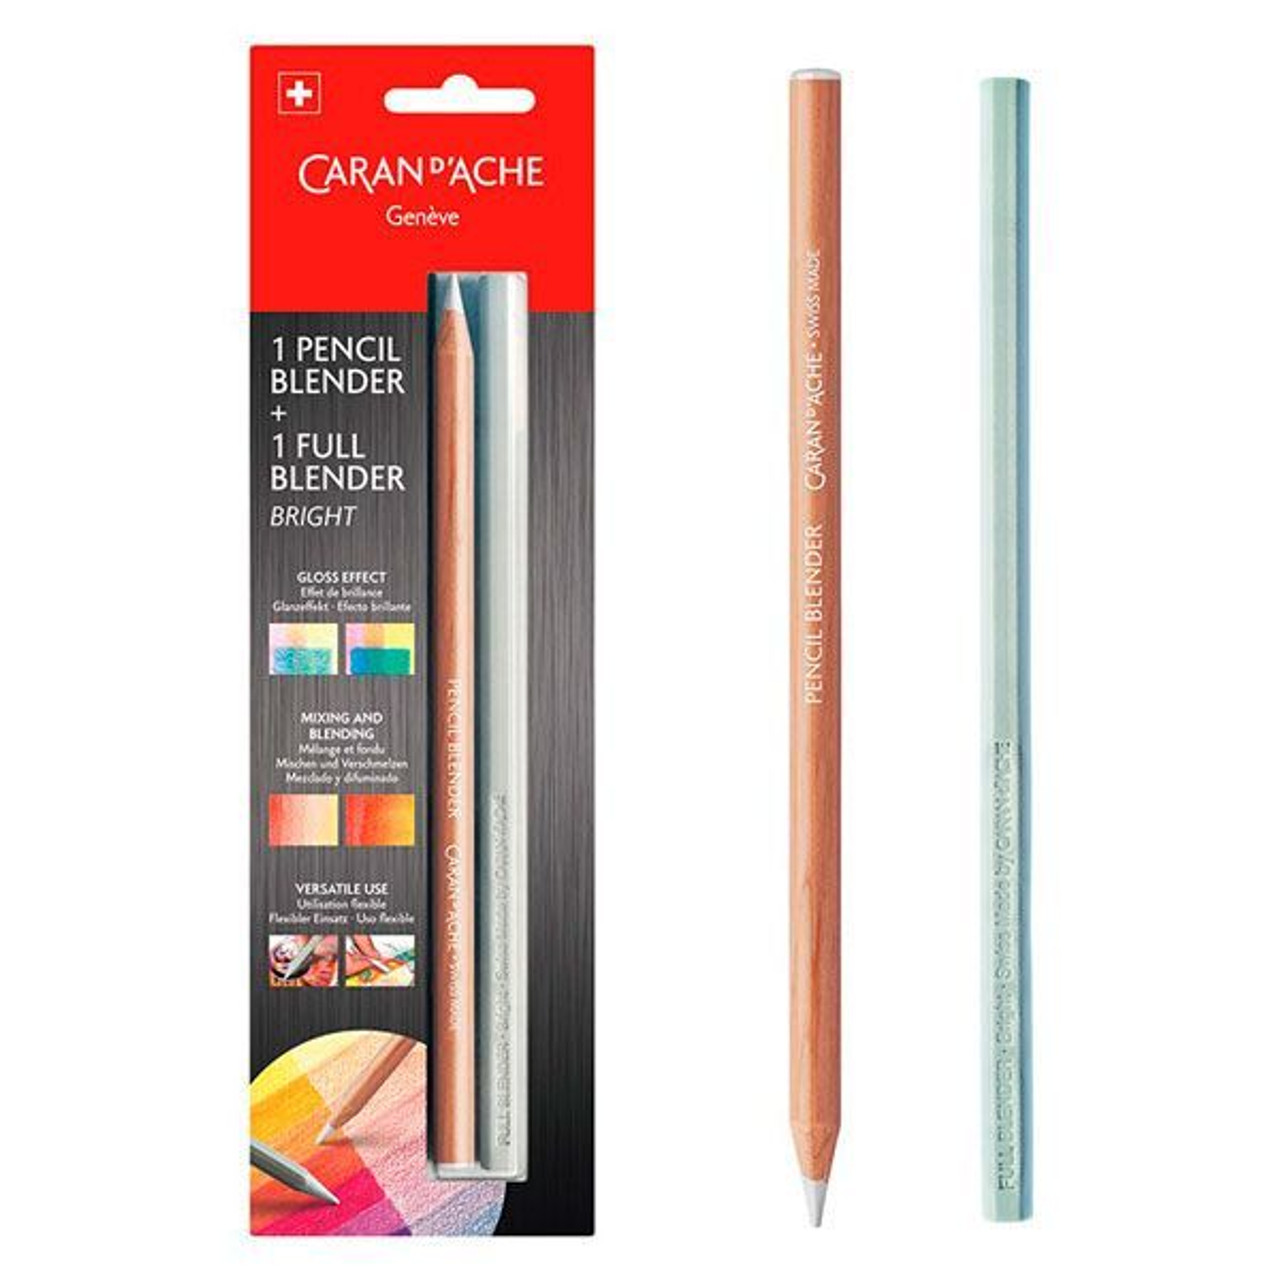 Prismacolor Blender Pencil Colorless Drawing, Wax Blending Tool